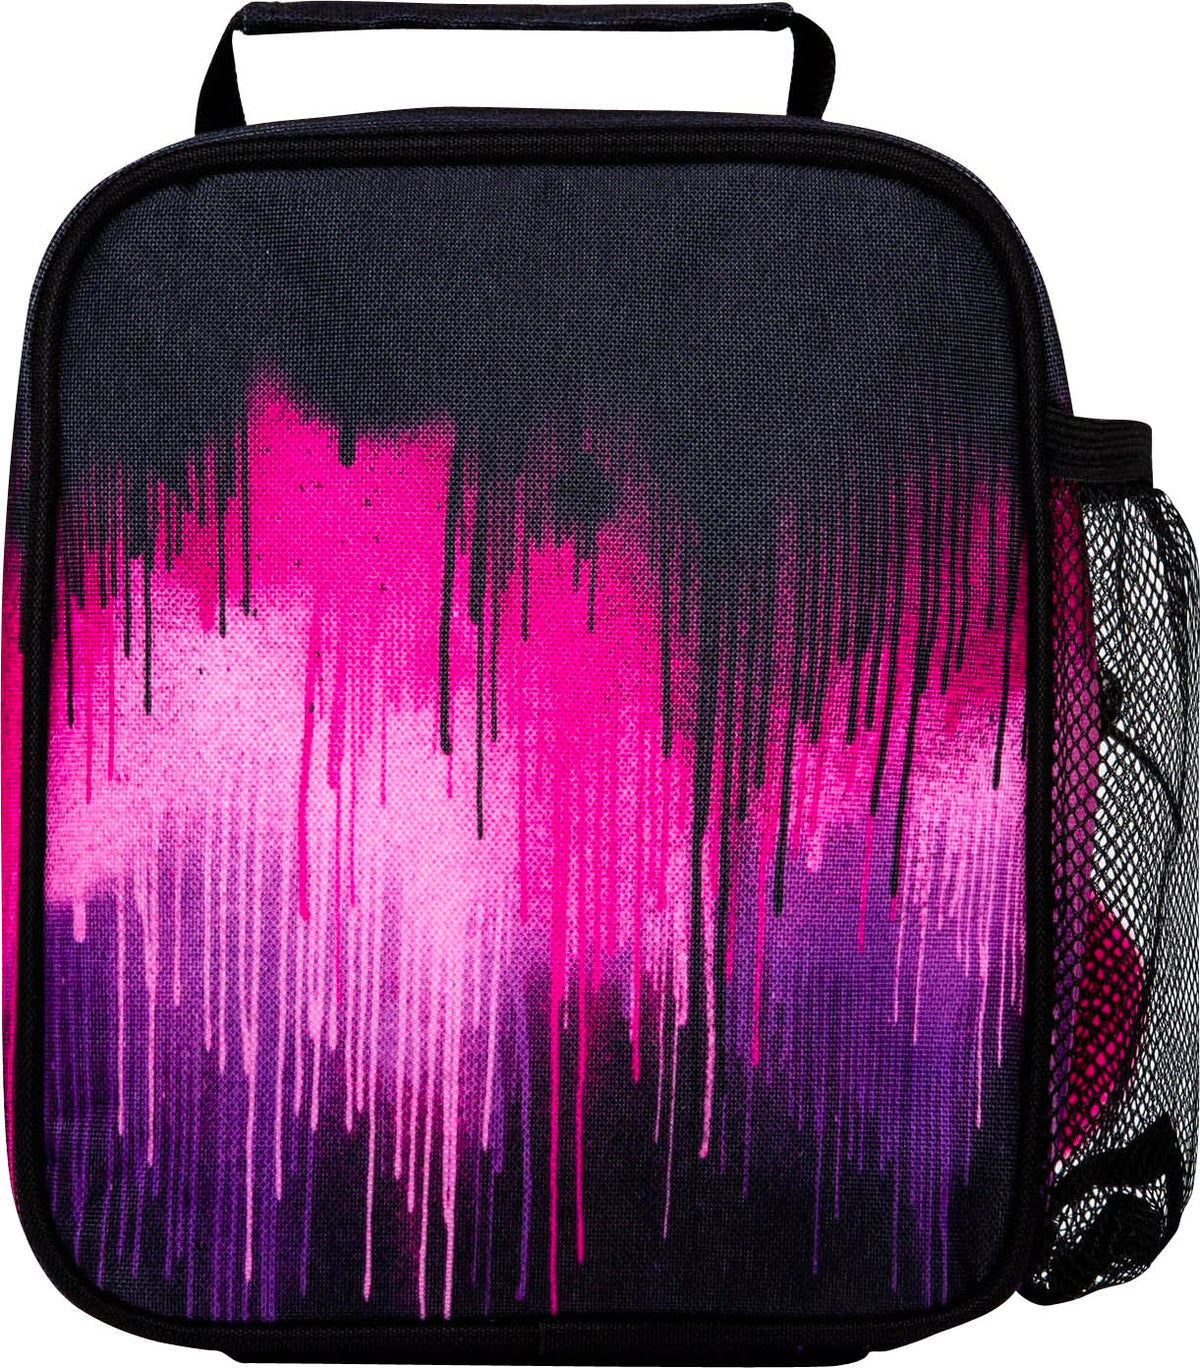 Hype Lunch Bag - Purple & Pink Drip